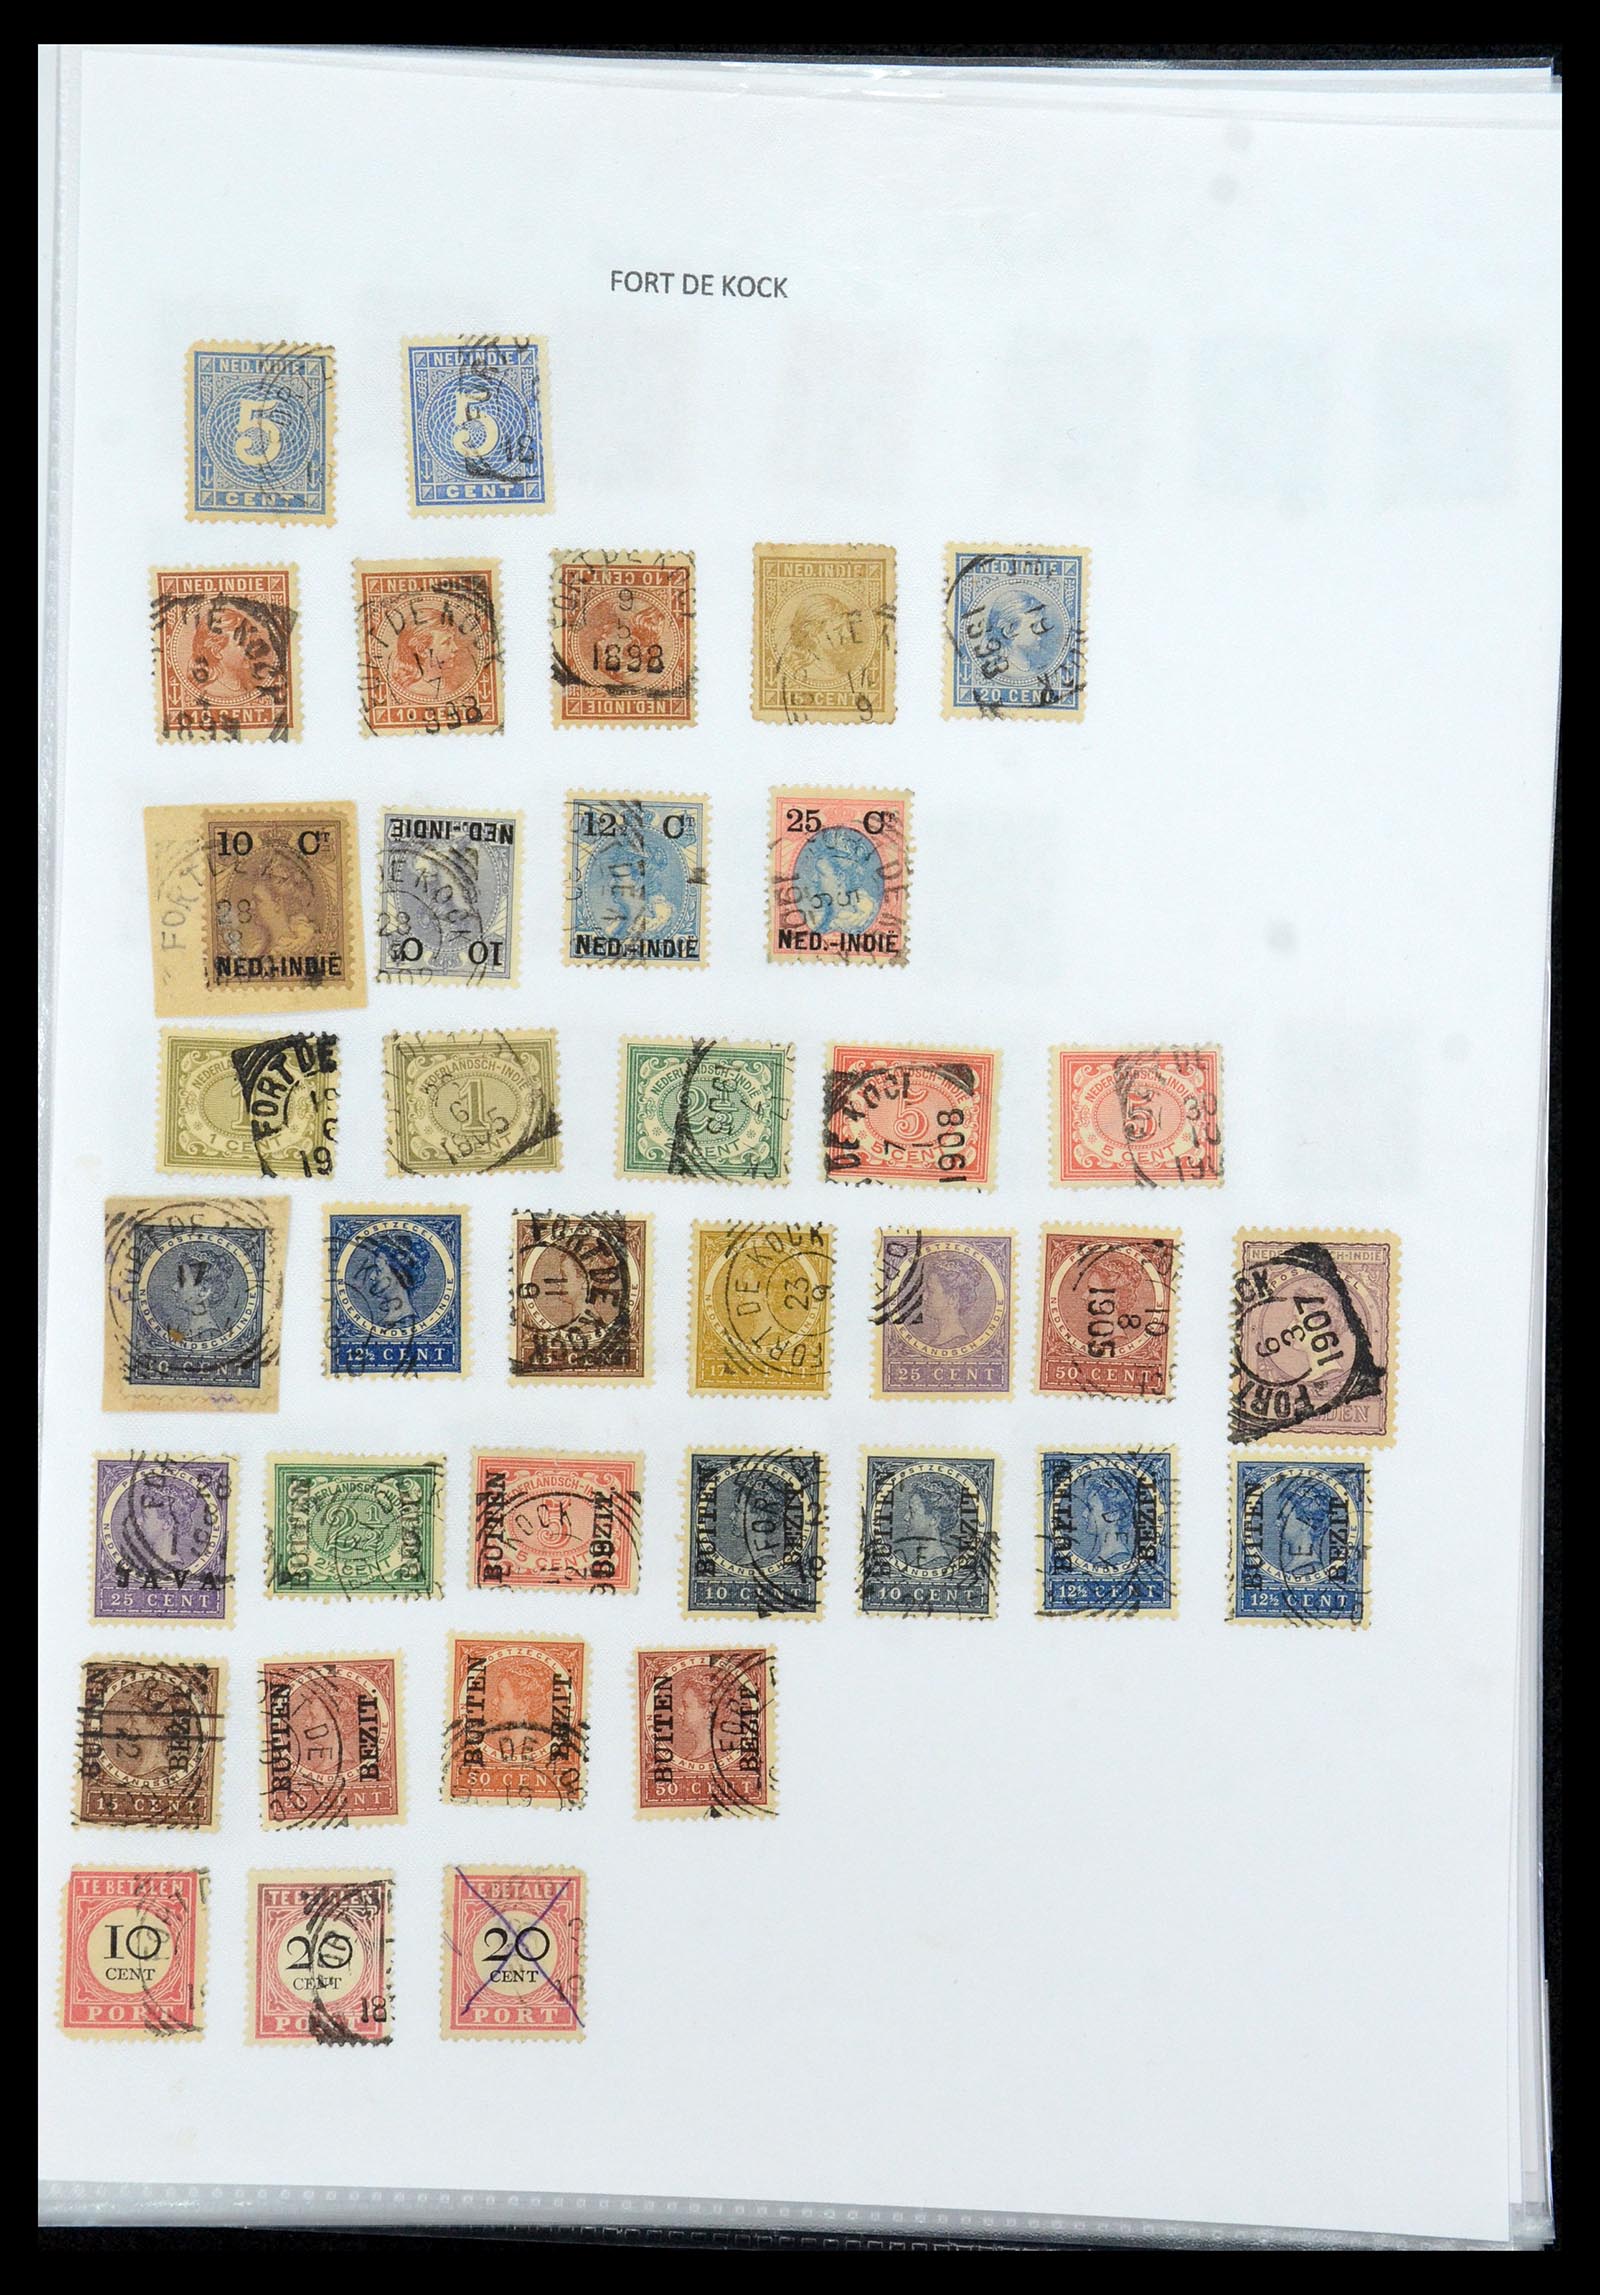 36432 052 - Stamp collection 36432 Dutch east Indies square cancels.